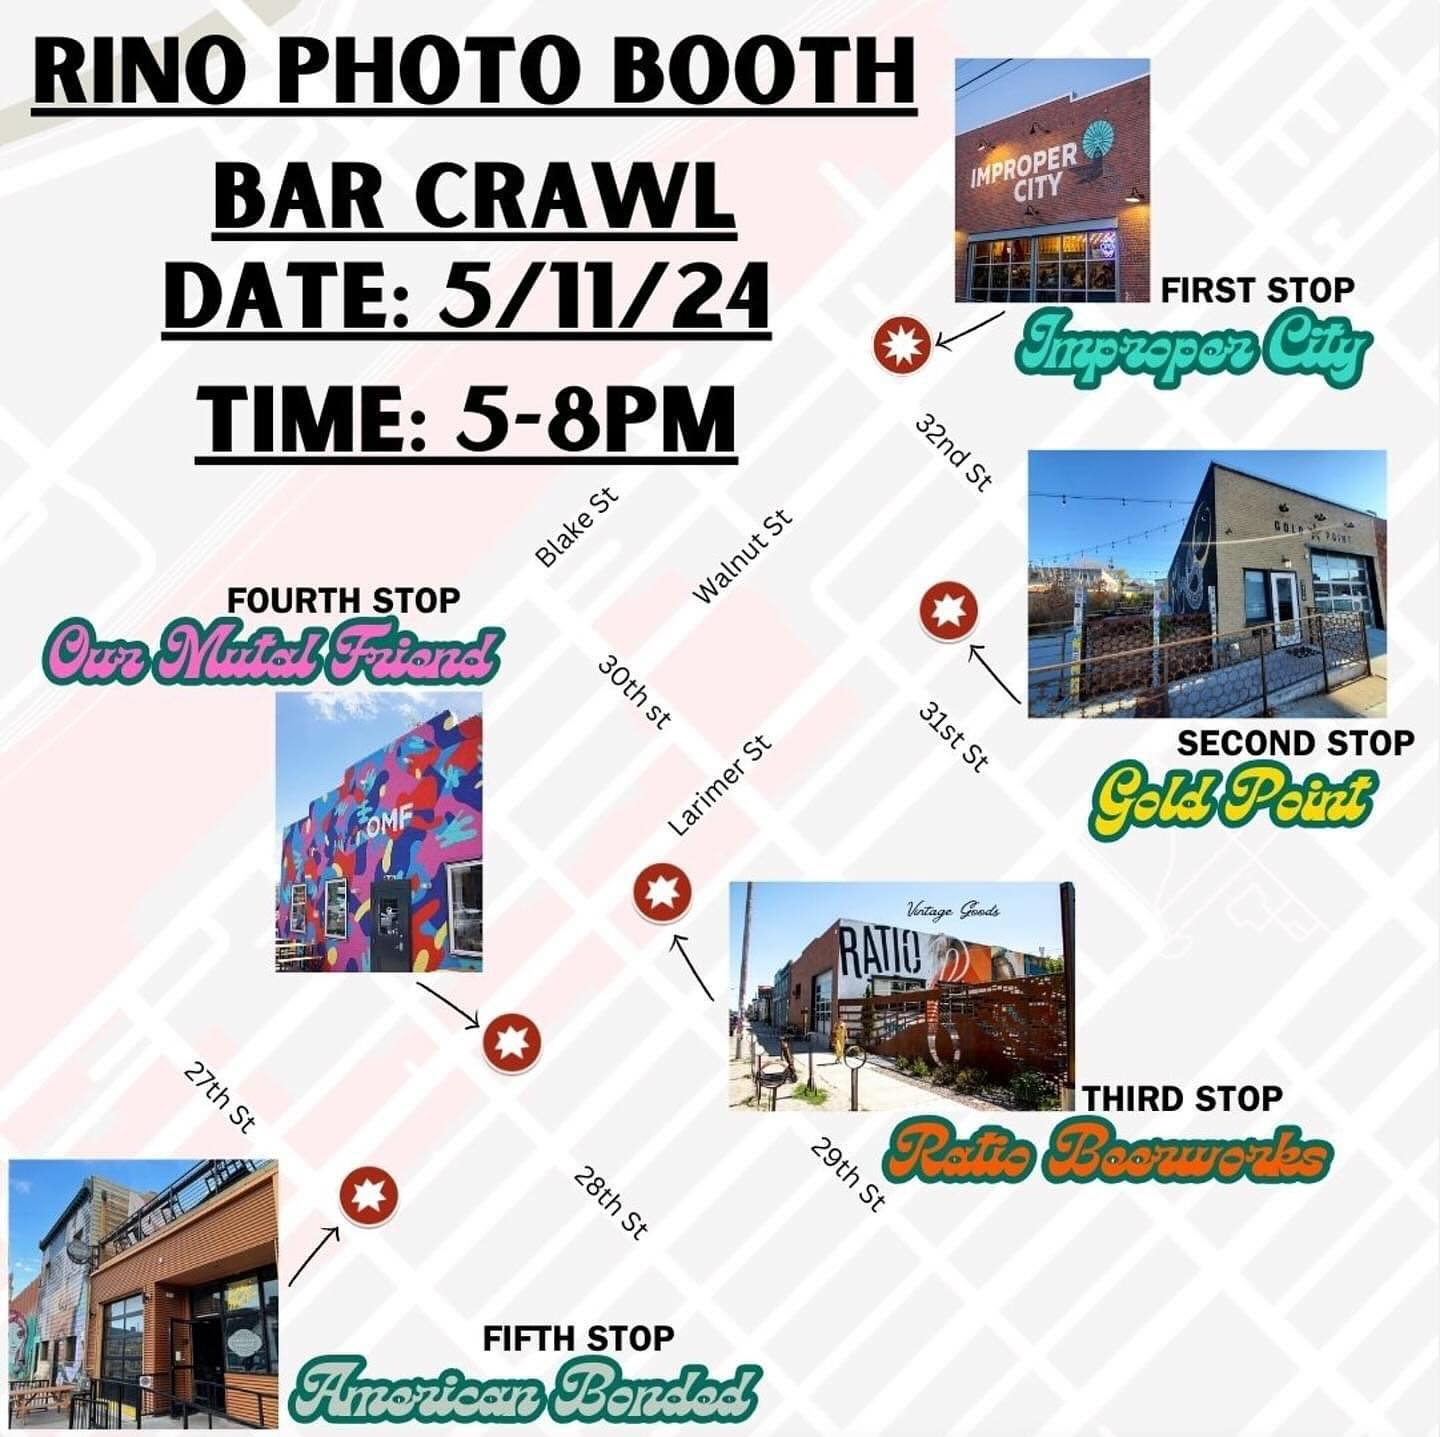 On Saturday we&rsquo;re joining up with @impropercity @ratiobeerworks @omfbrewing and @americanbonded to celebrate an awesome local company that is responsible for our amazing vintage Photo Booth, @photobangco ! Make sure to grab a drink and snap a s